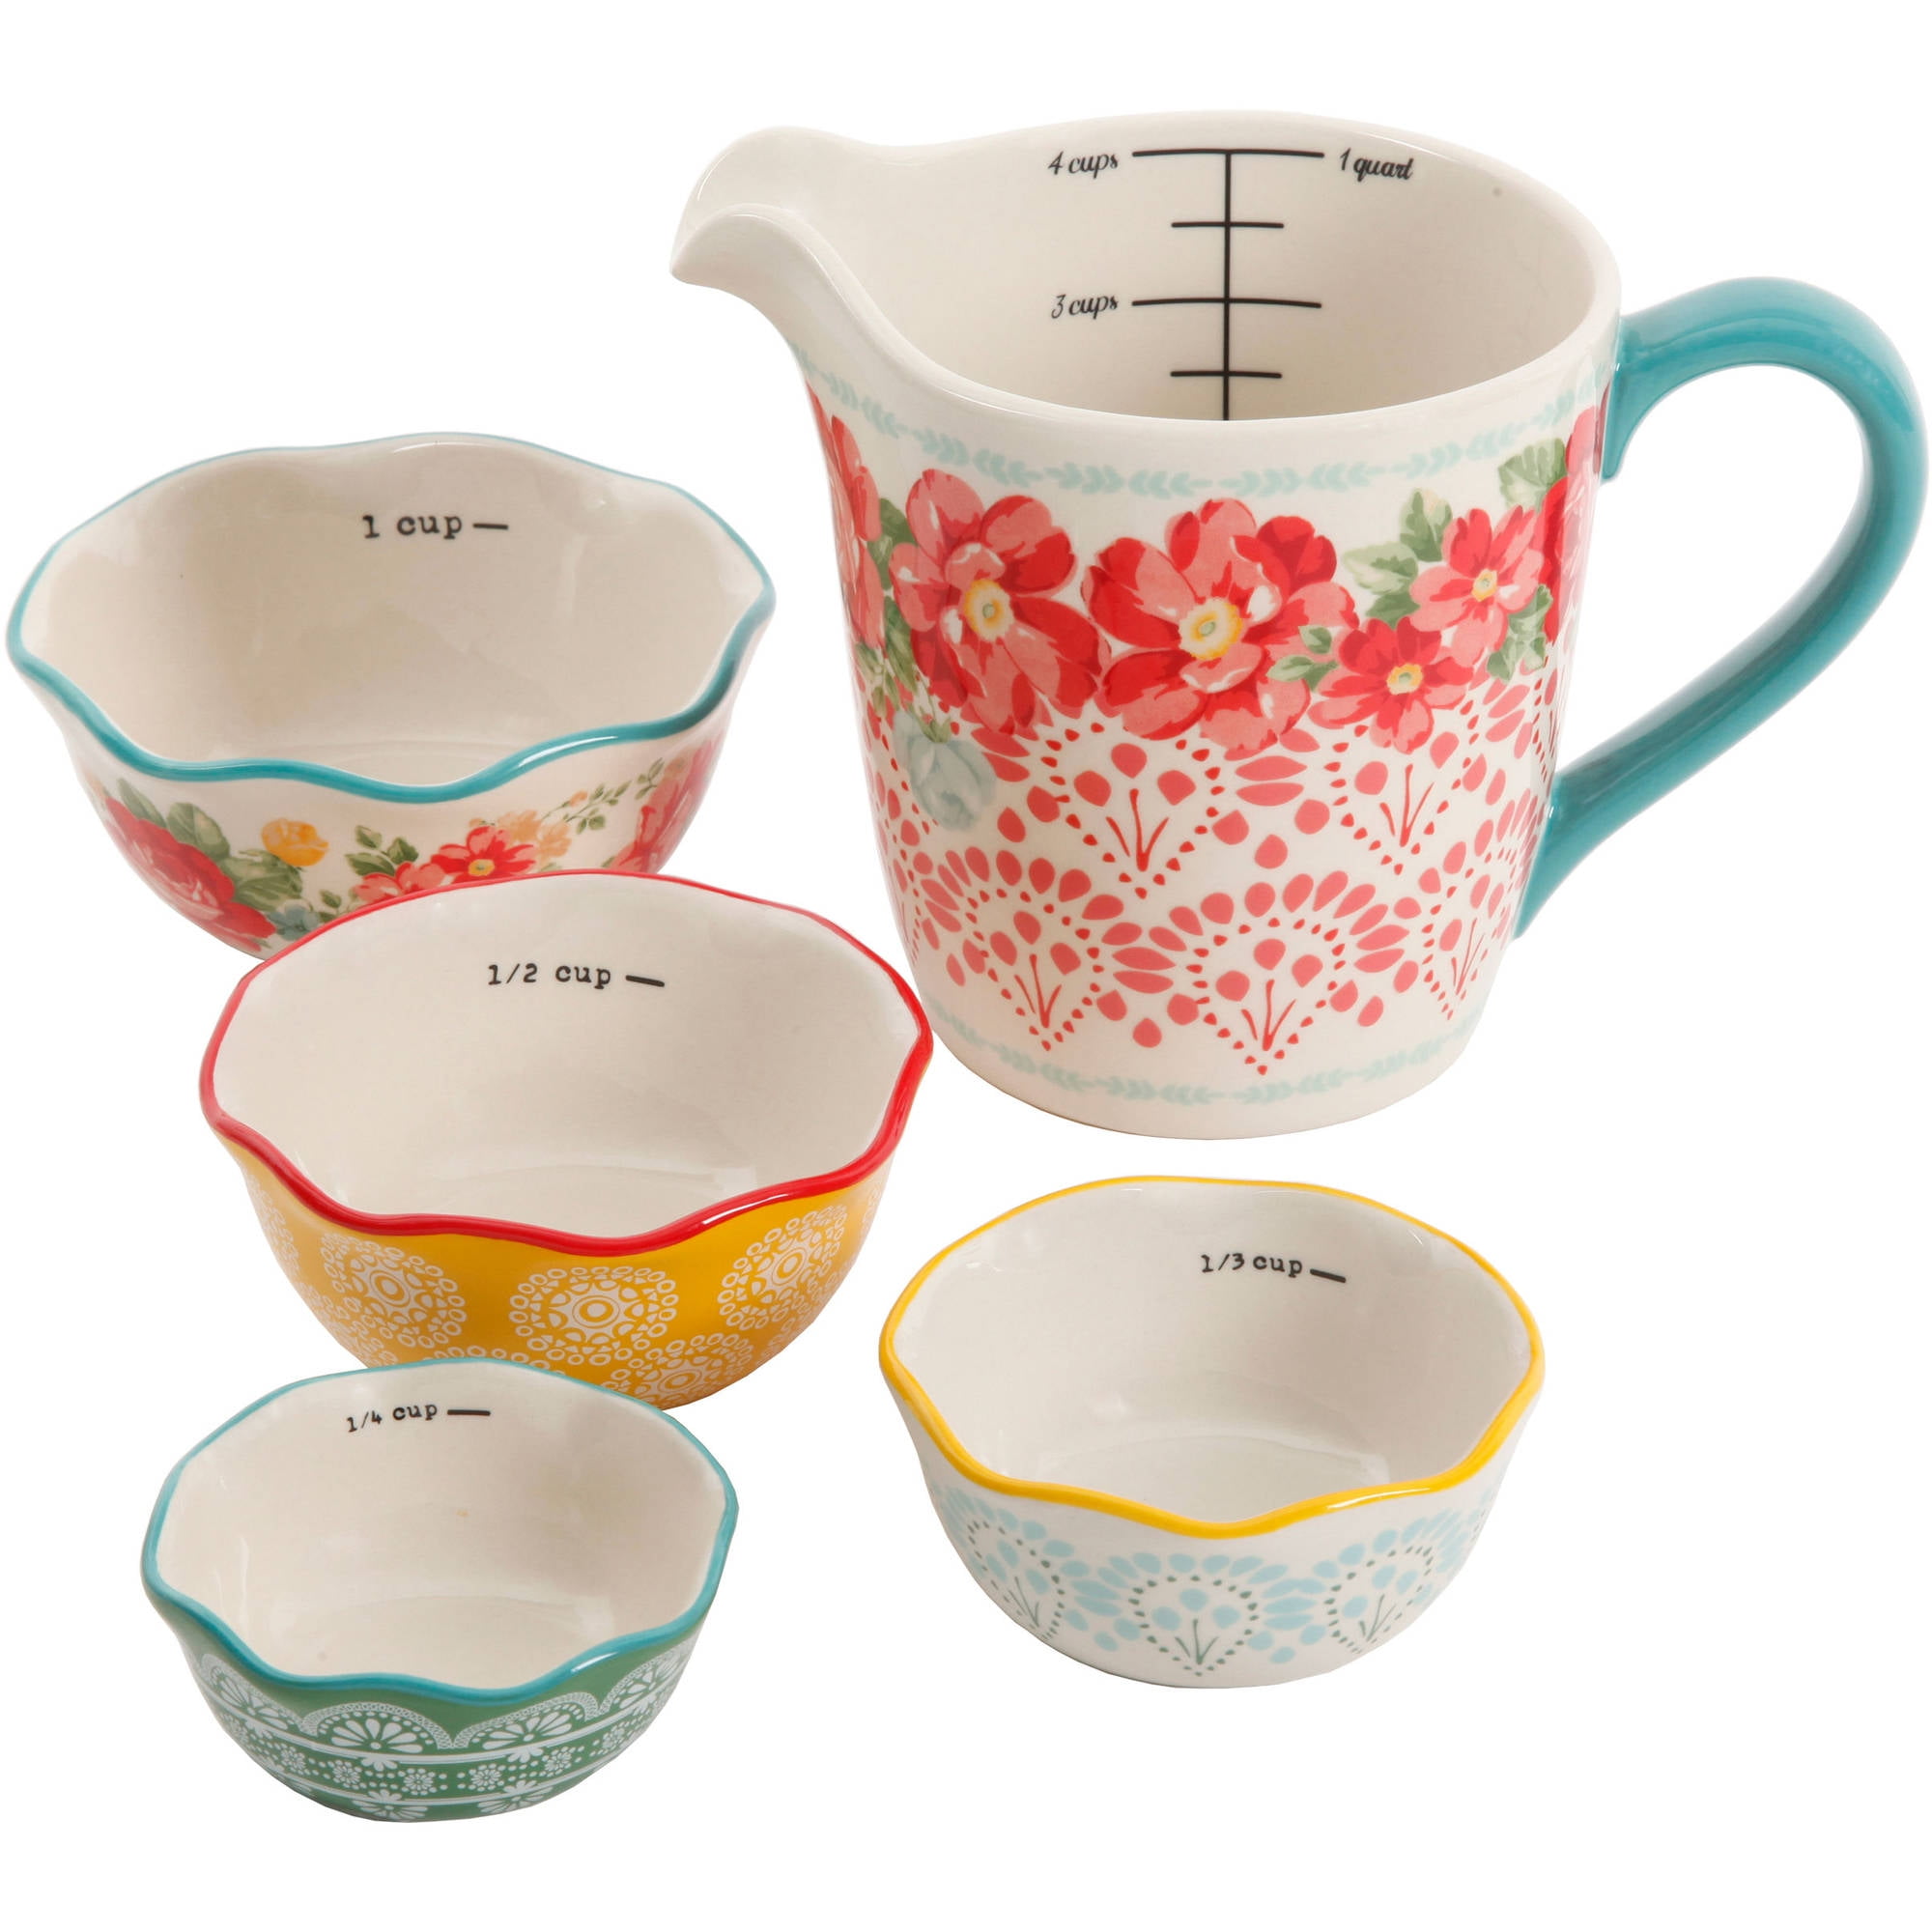 The Pioneer Woman Breezy Blossom 4-piece Measuring Bowls 